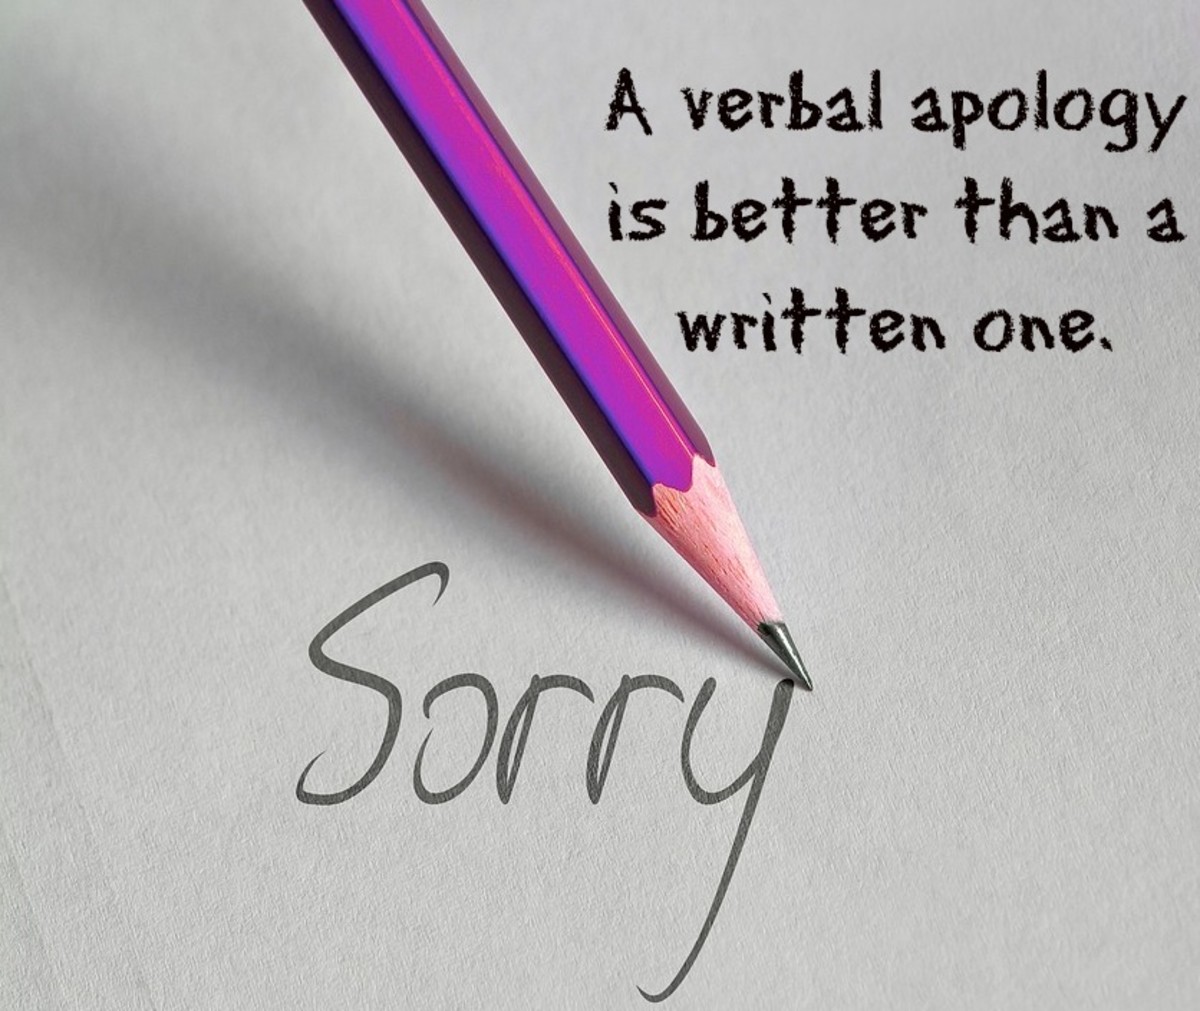 A written apology can be misinterpreted, leading to more hard feelings.